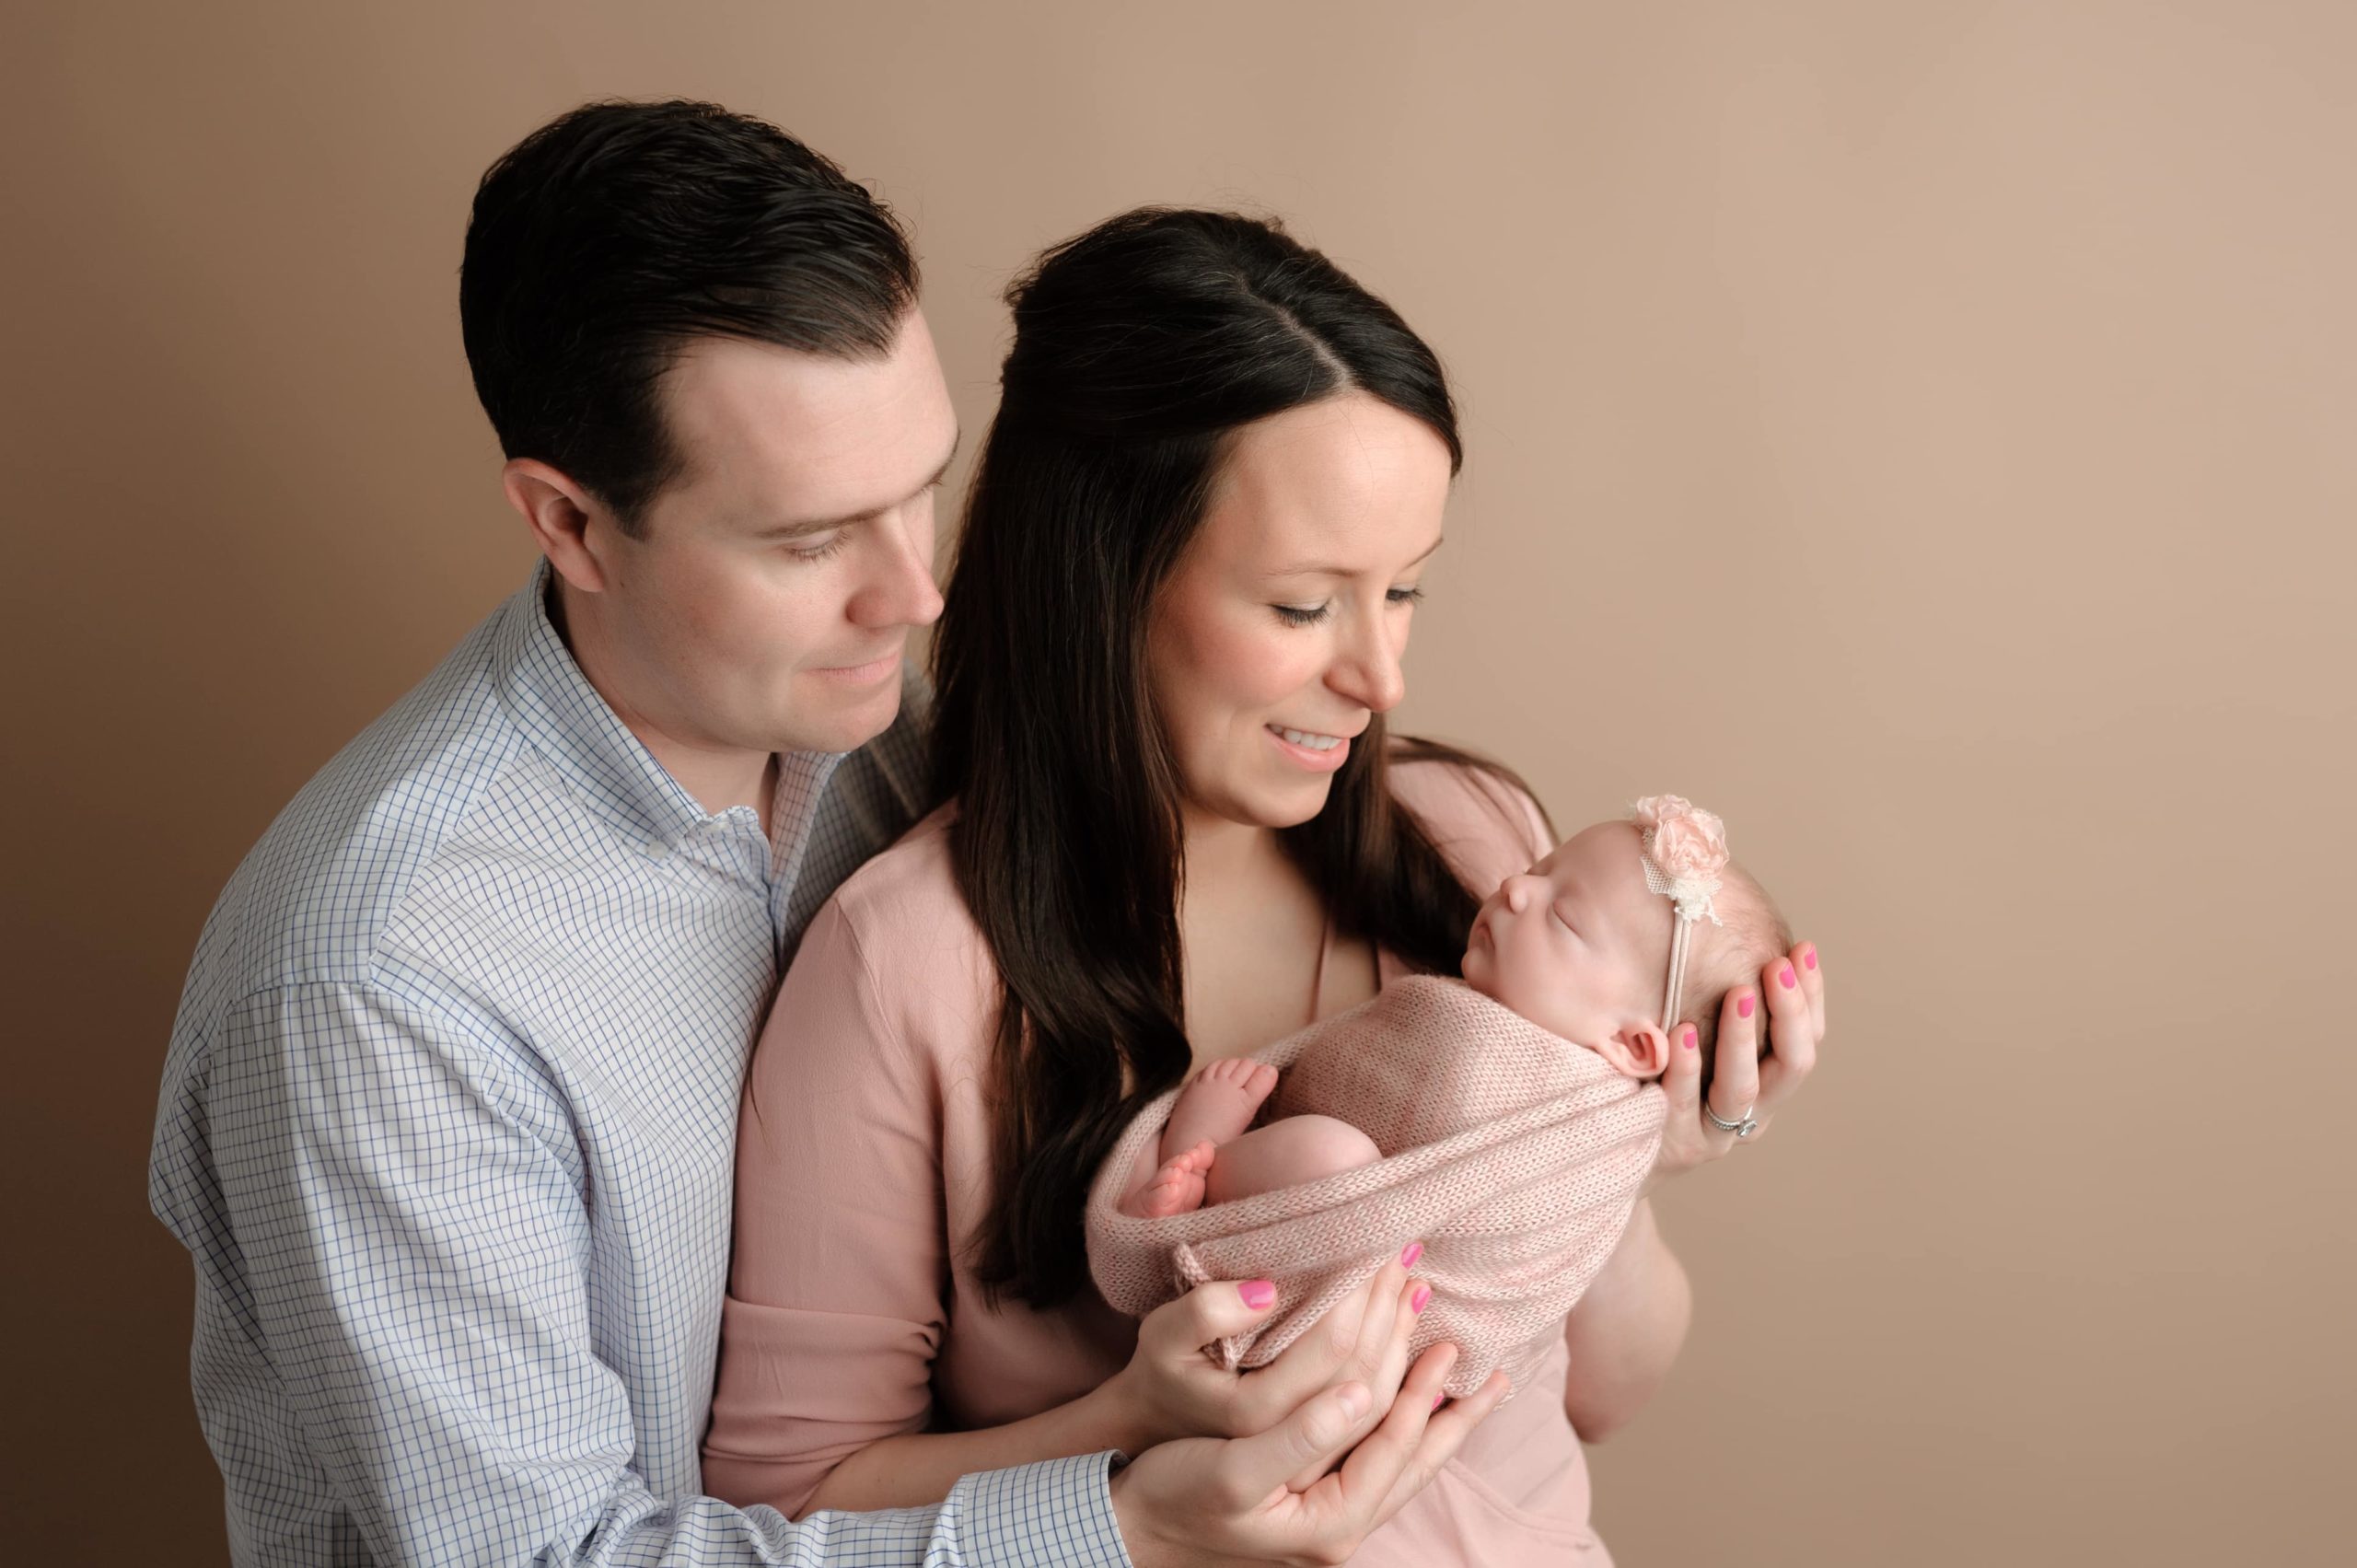 Newborn photoshoot with mom and dad holding their baby in front of a deep beige background